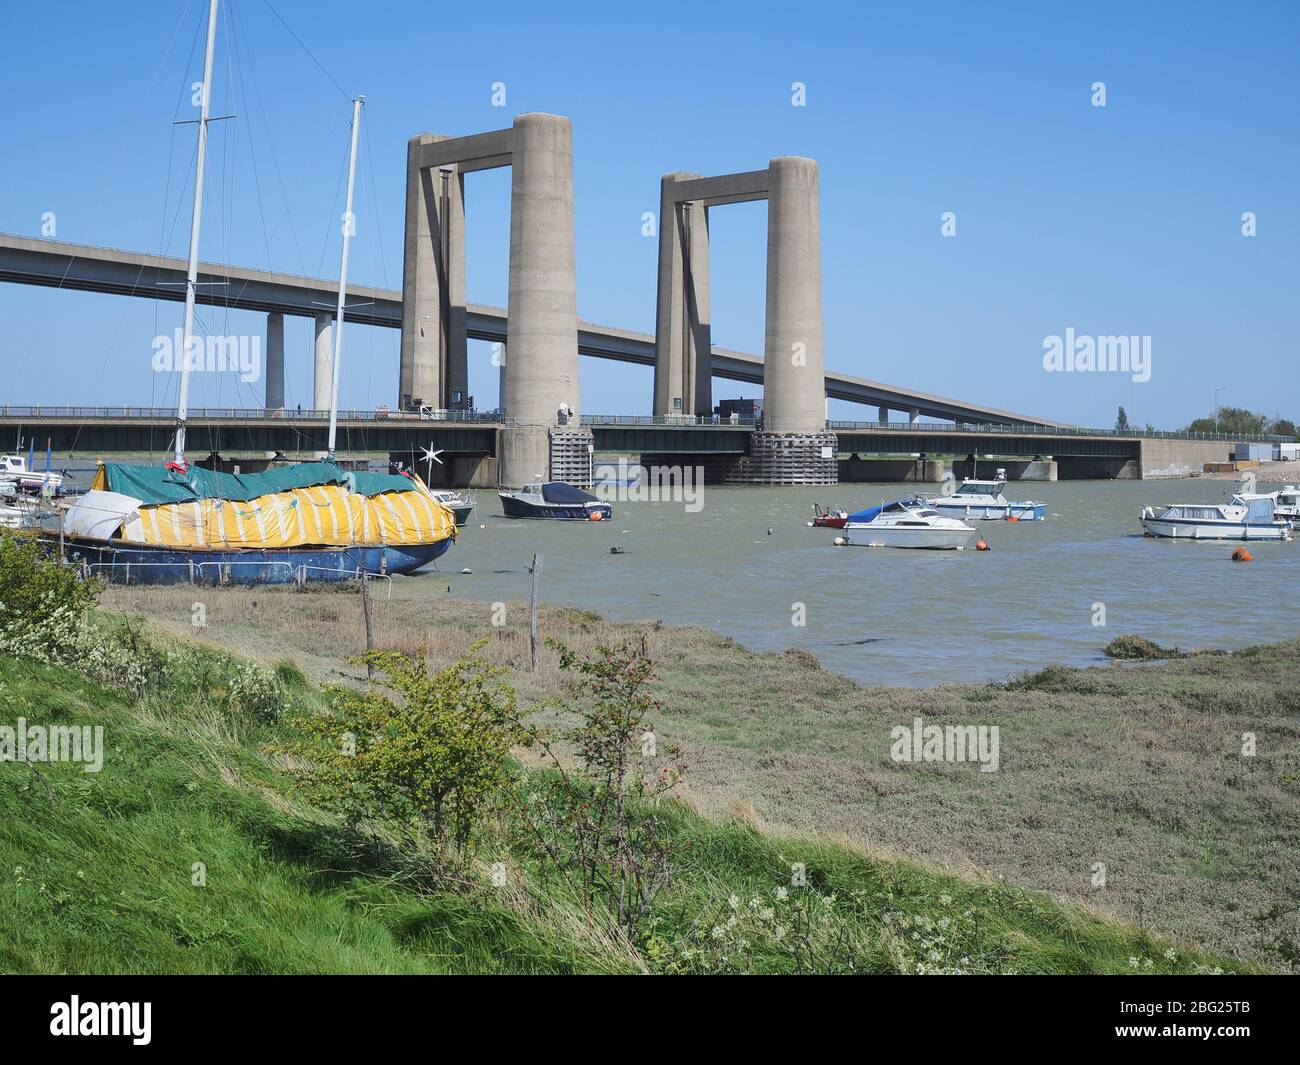 Iwade, Kent, UK. 20th Apr, 2020. Today is the 60th anniversary of the distinctive Kingsferry Bridge, linking Isle of Sheppey with mainland Kent, being opened by the Duchess of Kent on 20 Apr, 1960. At the time it was the largest lifting bridge built in Britain since the Second World War. There is only one other similar design in the world based in Holland. In 2006, the infamous Sheppey Crossing was opened, but Kingsferry was retained for rail and road traffic. A generator is in situ for lifting the centre span as the power system needs a replacement part. Credit: James Bell/Alamy Live News Stock Photo